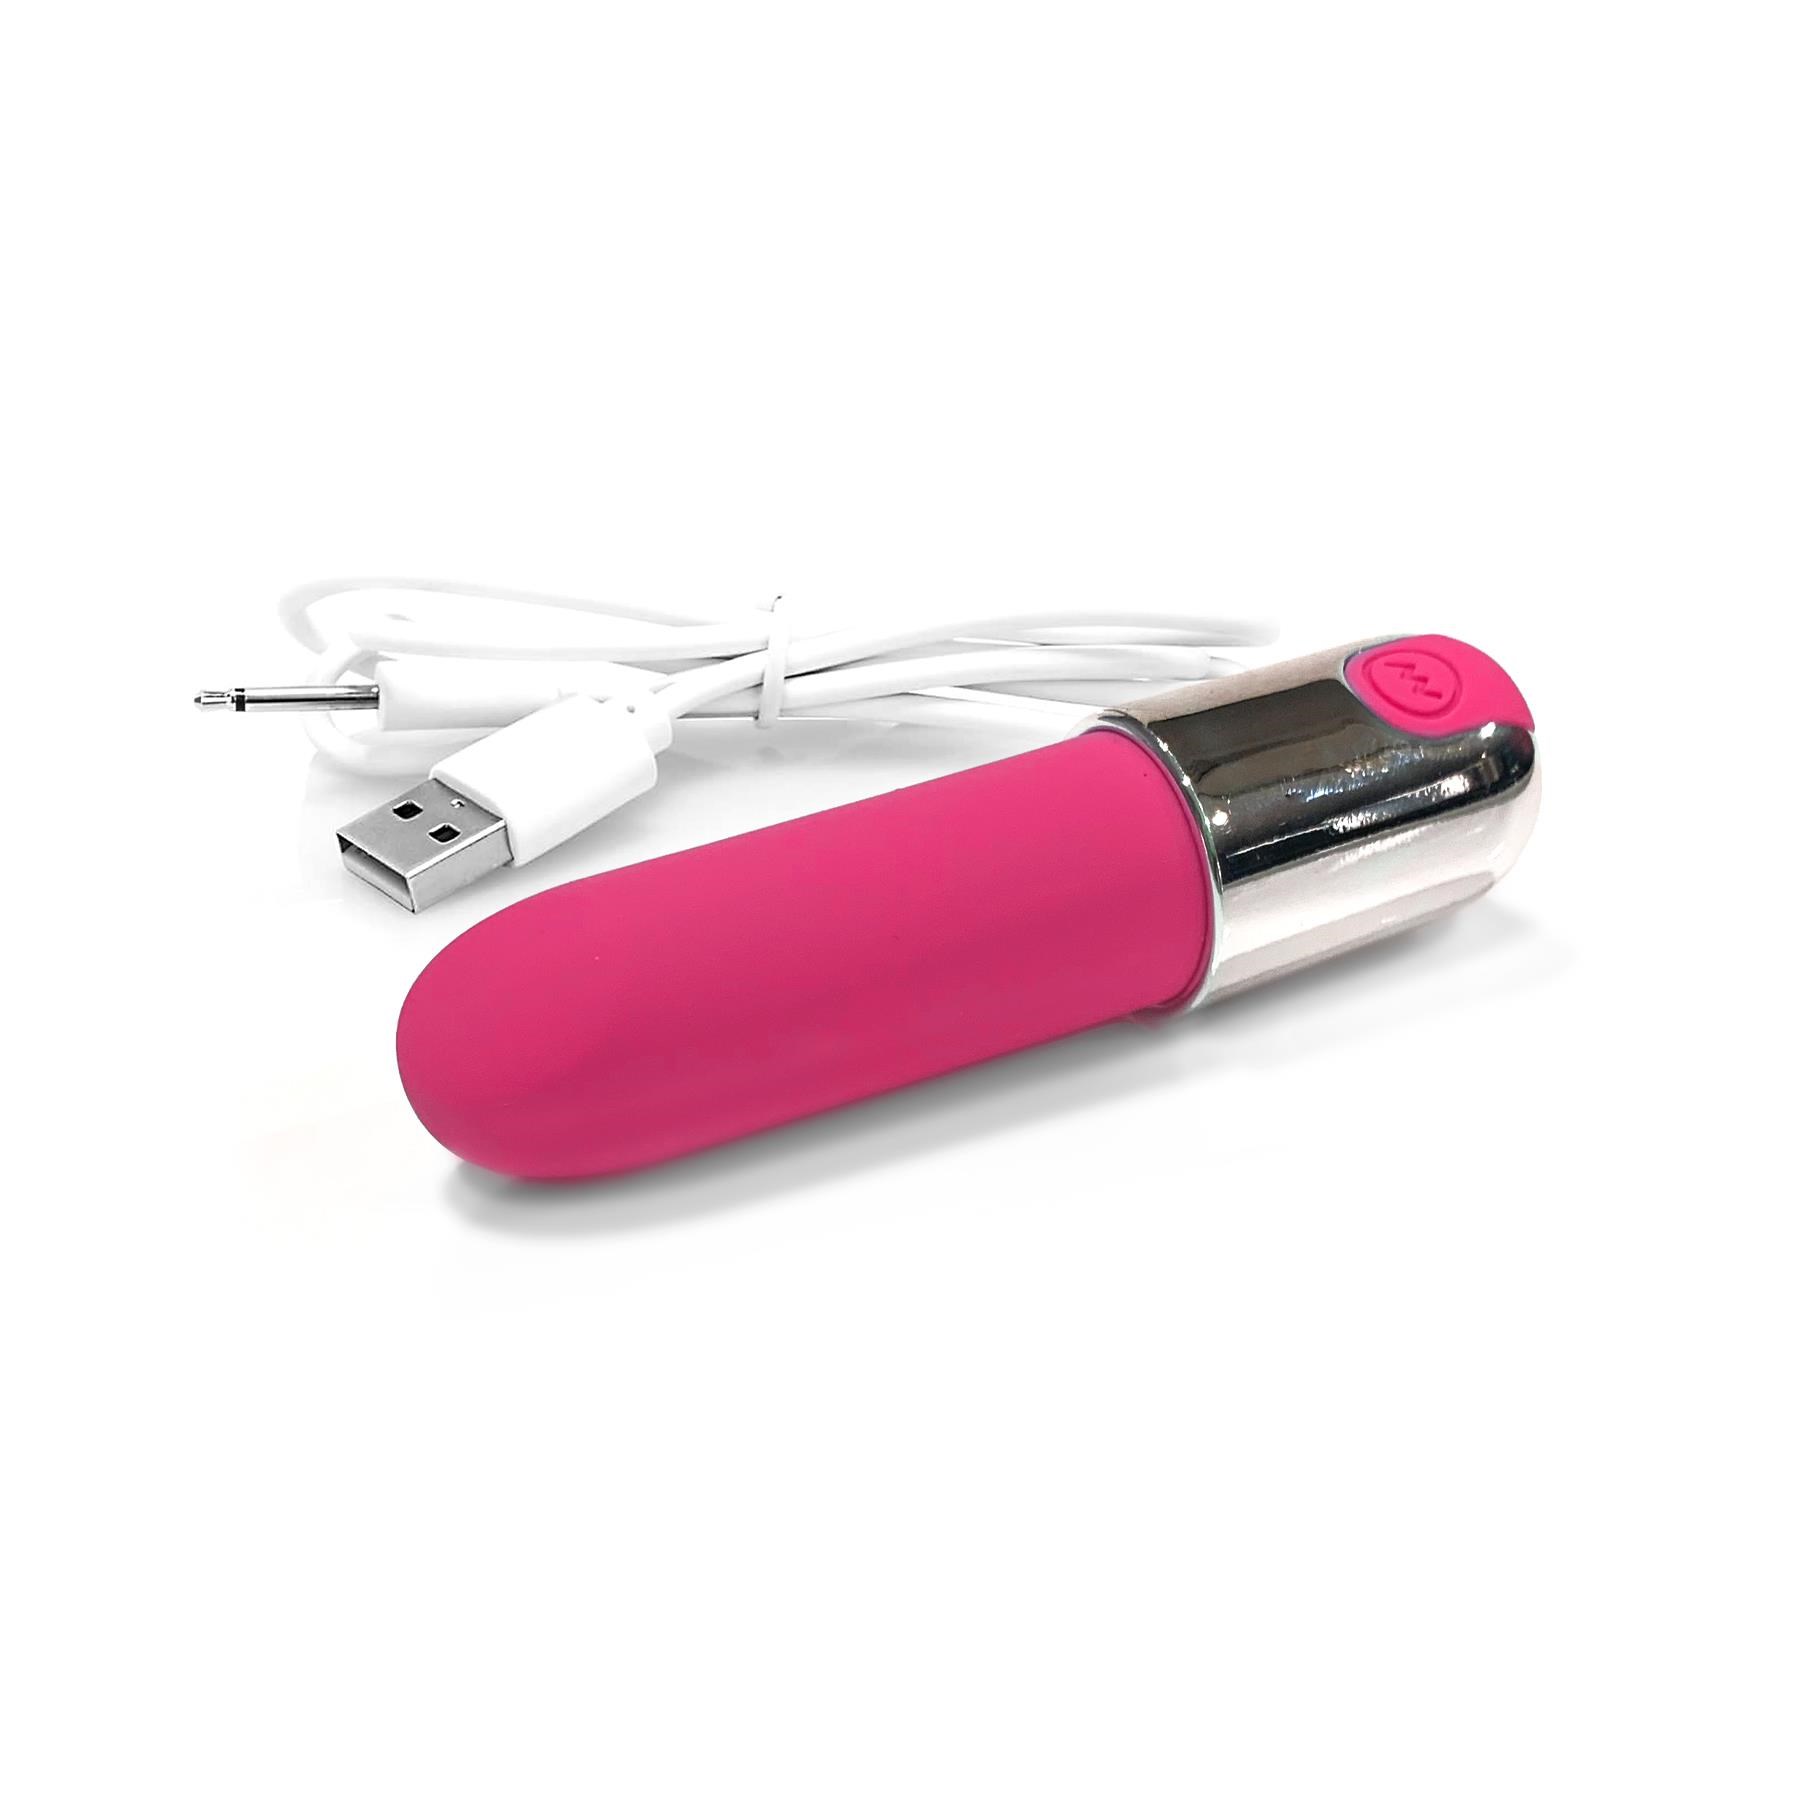 Nixie Smooch Rechargeable Lipstick Bullet - Showing Where Charging Cable is Placed